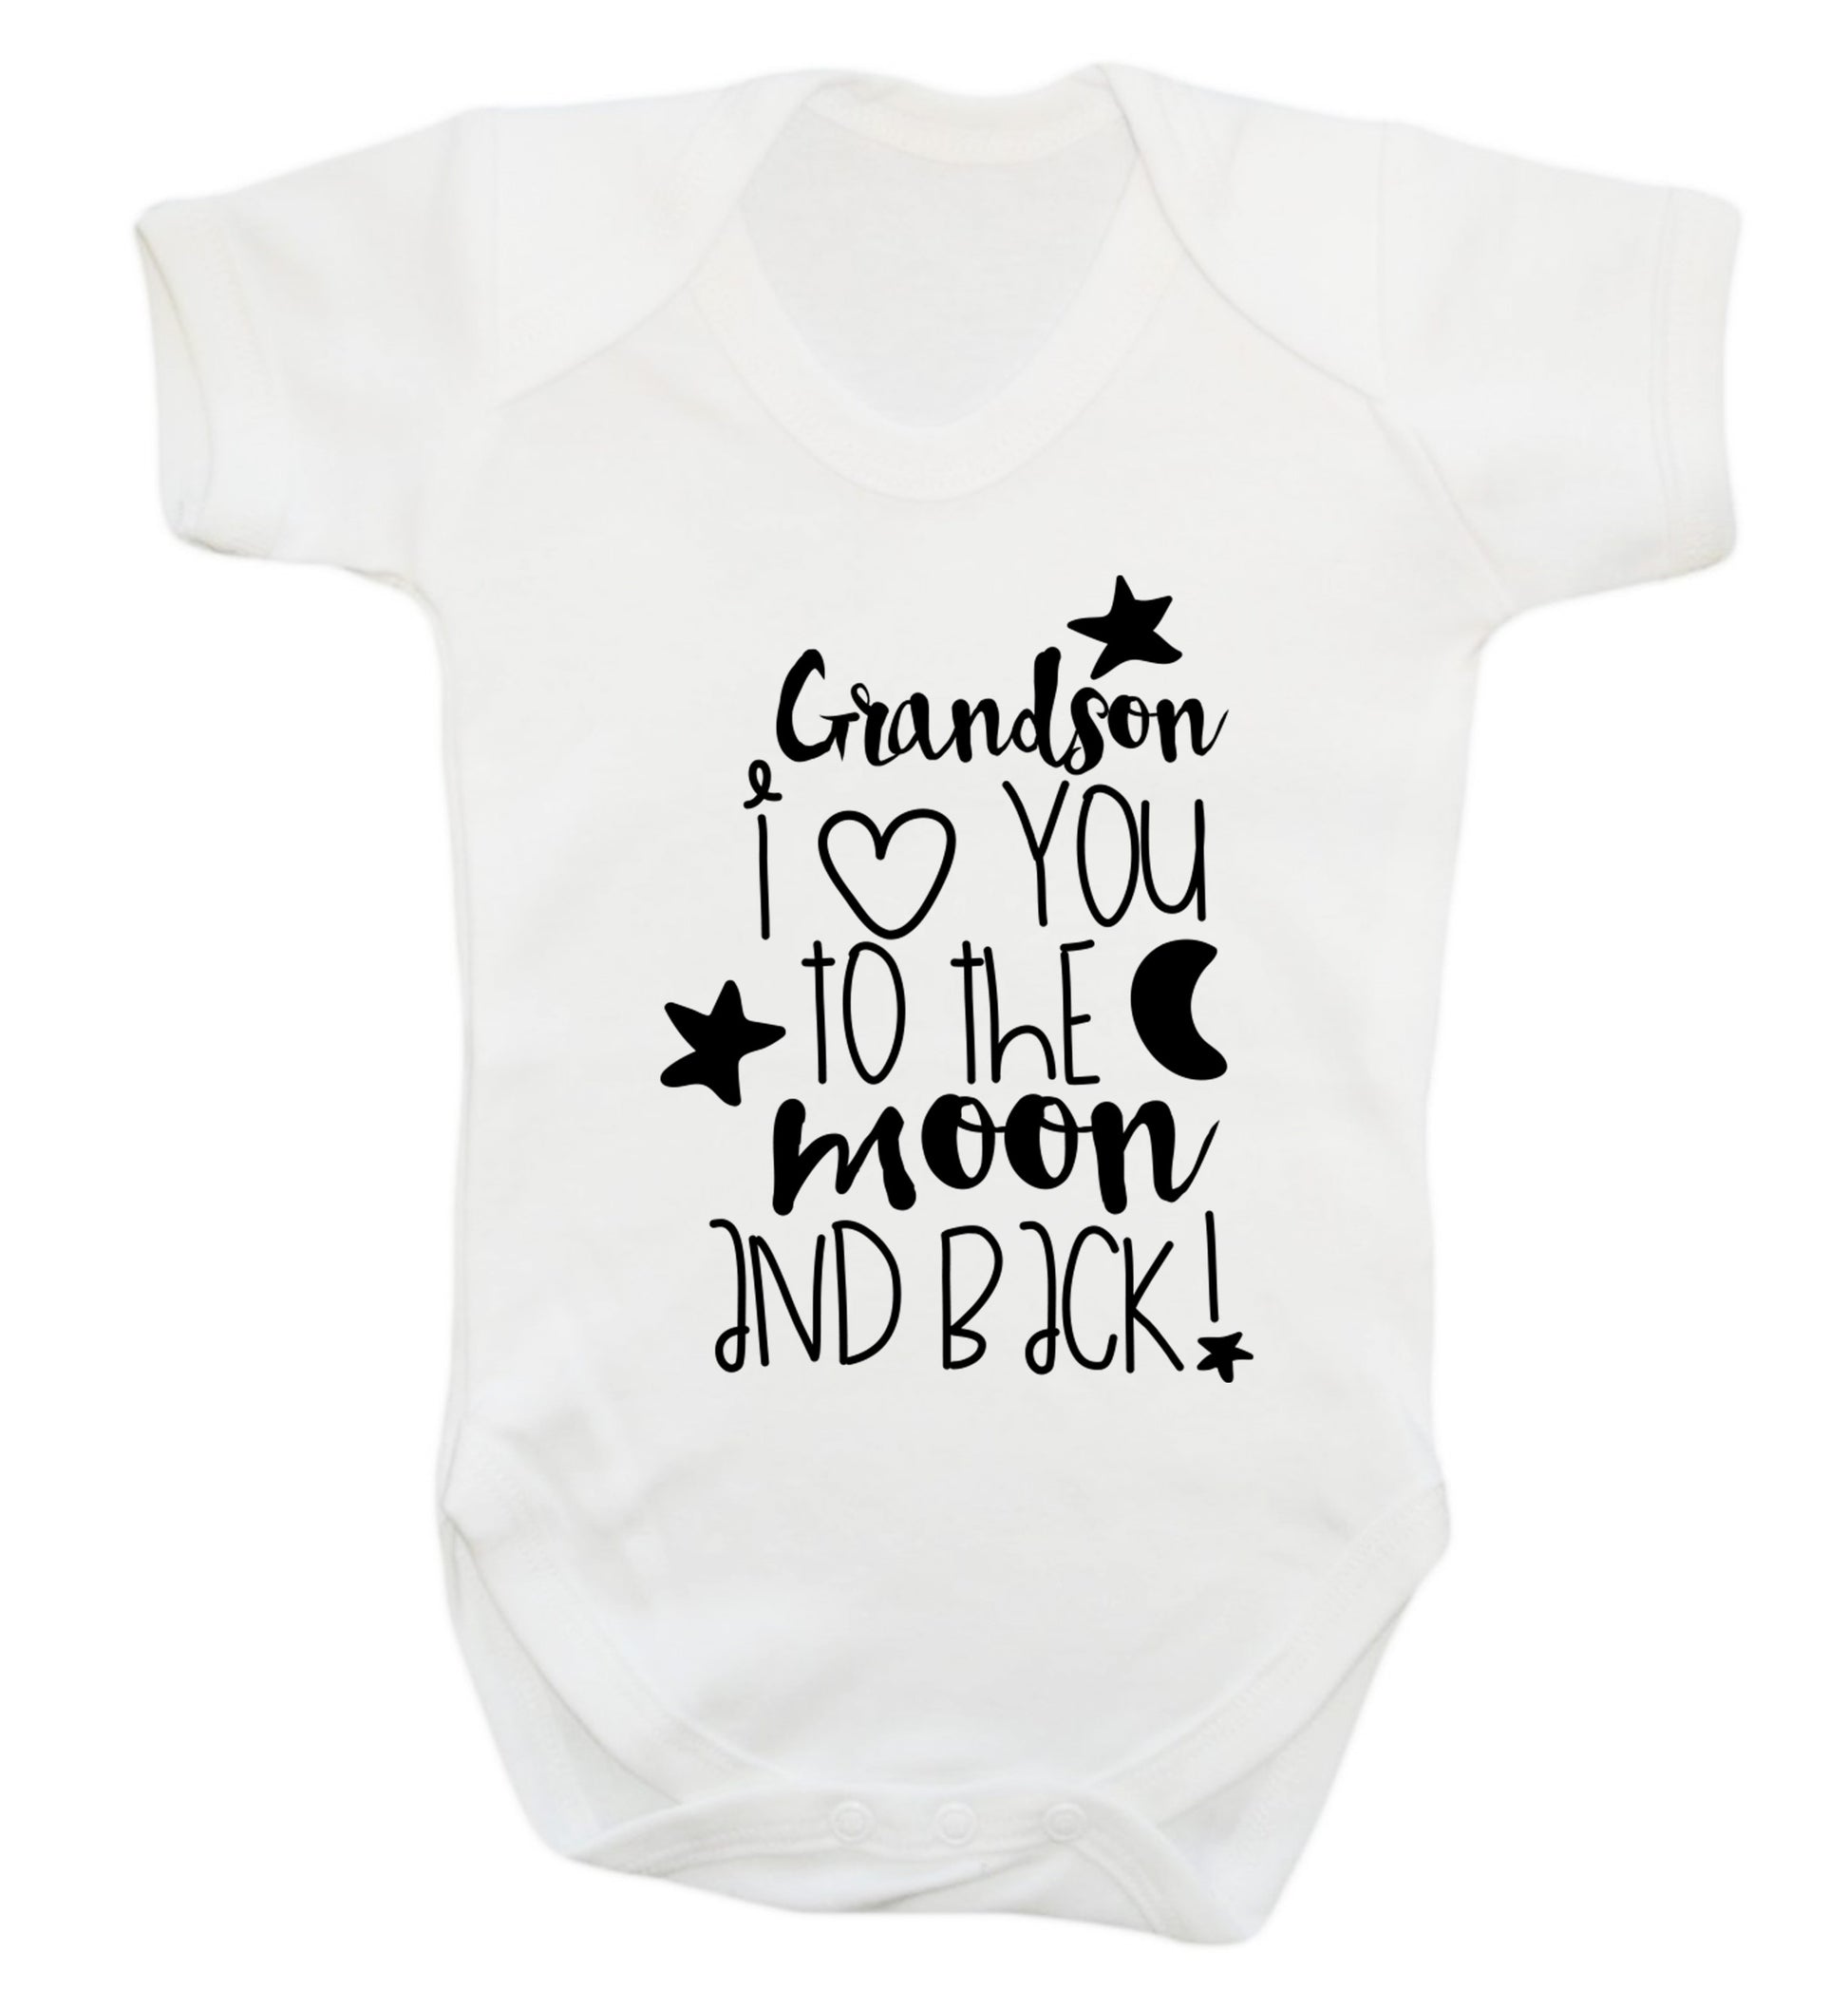 Grandson I love you to the moon and back Baby Vest white 18-24 months